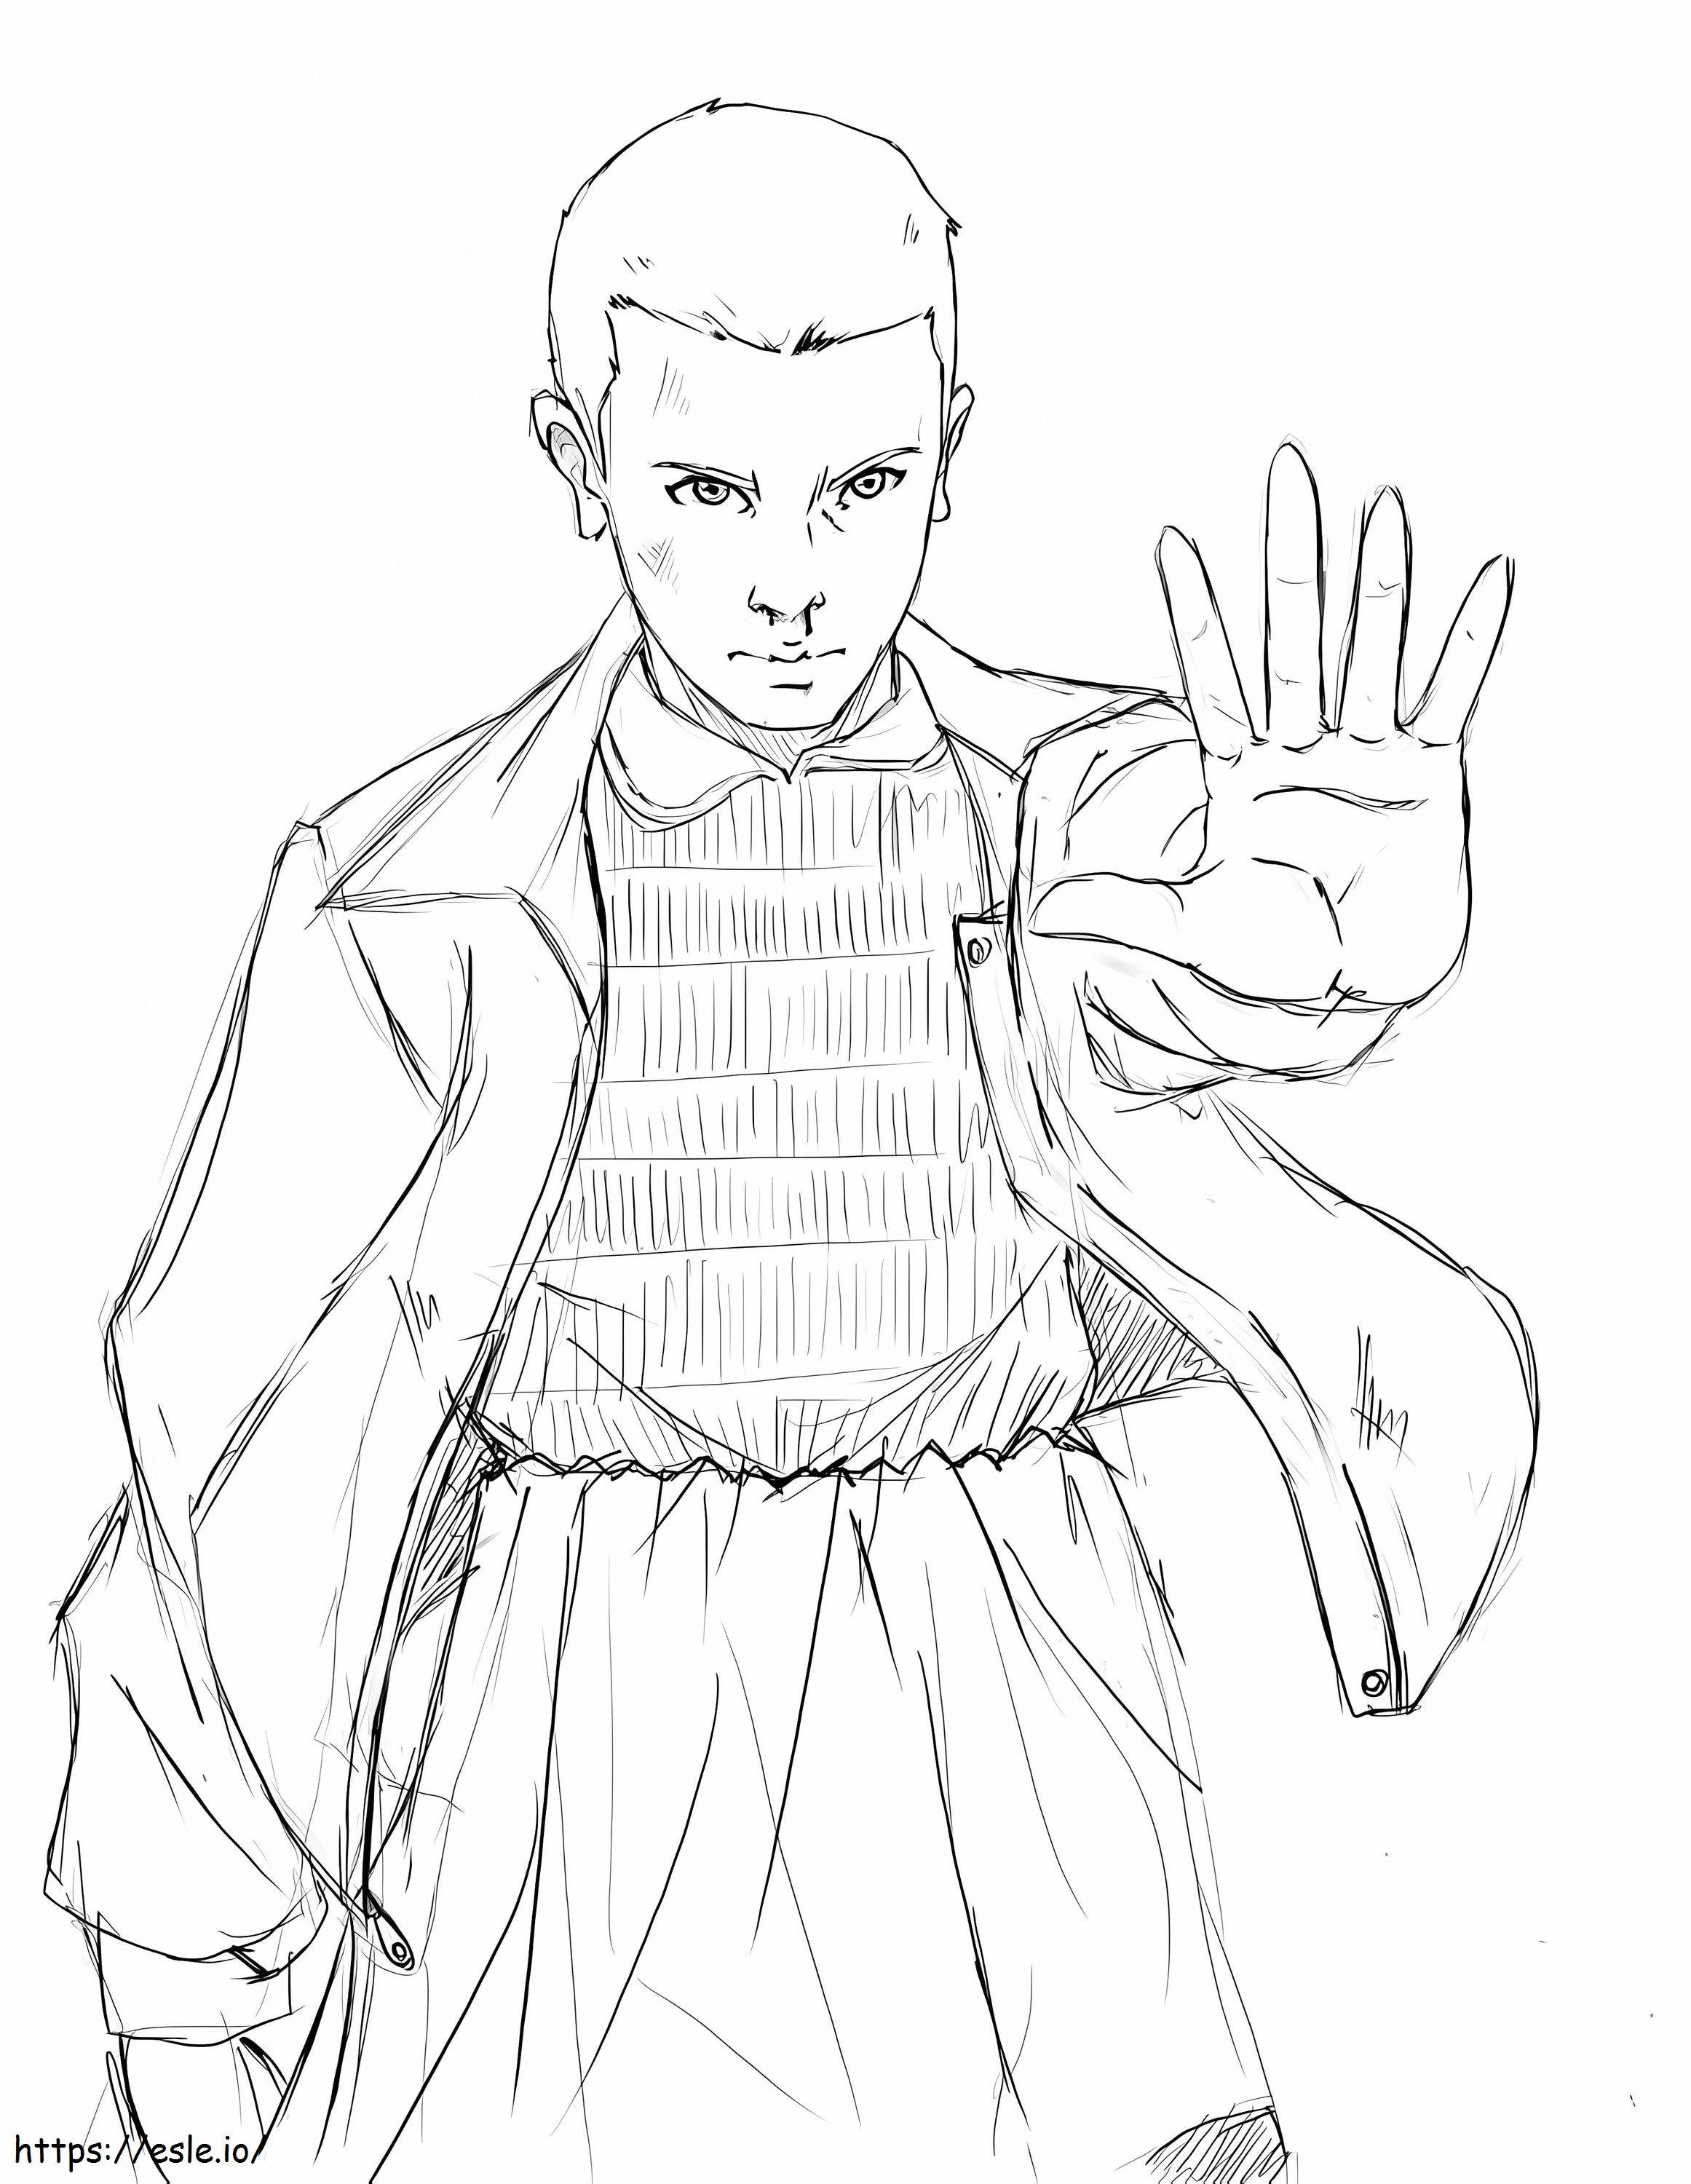 Eleven Stranger Things Coloring Page 2 coloring page